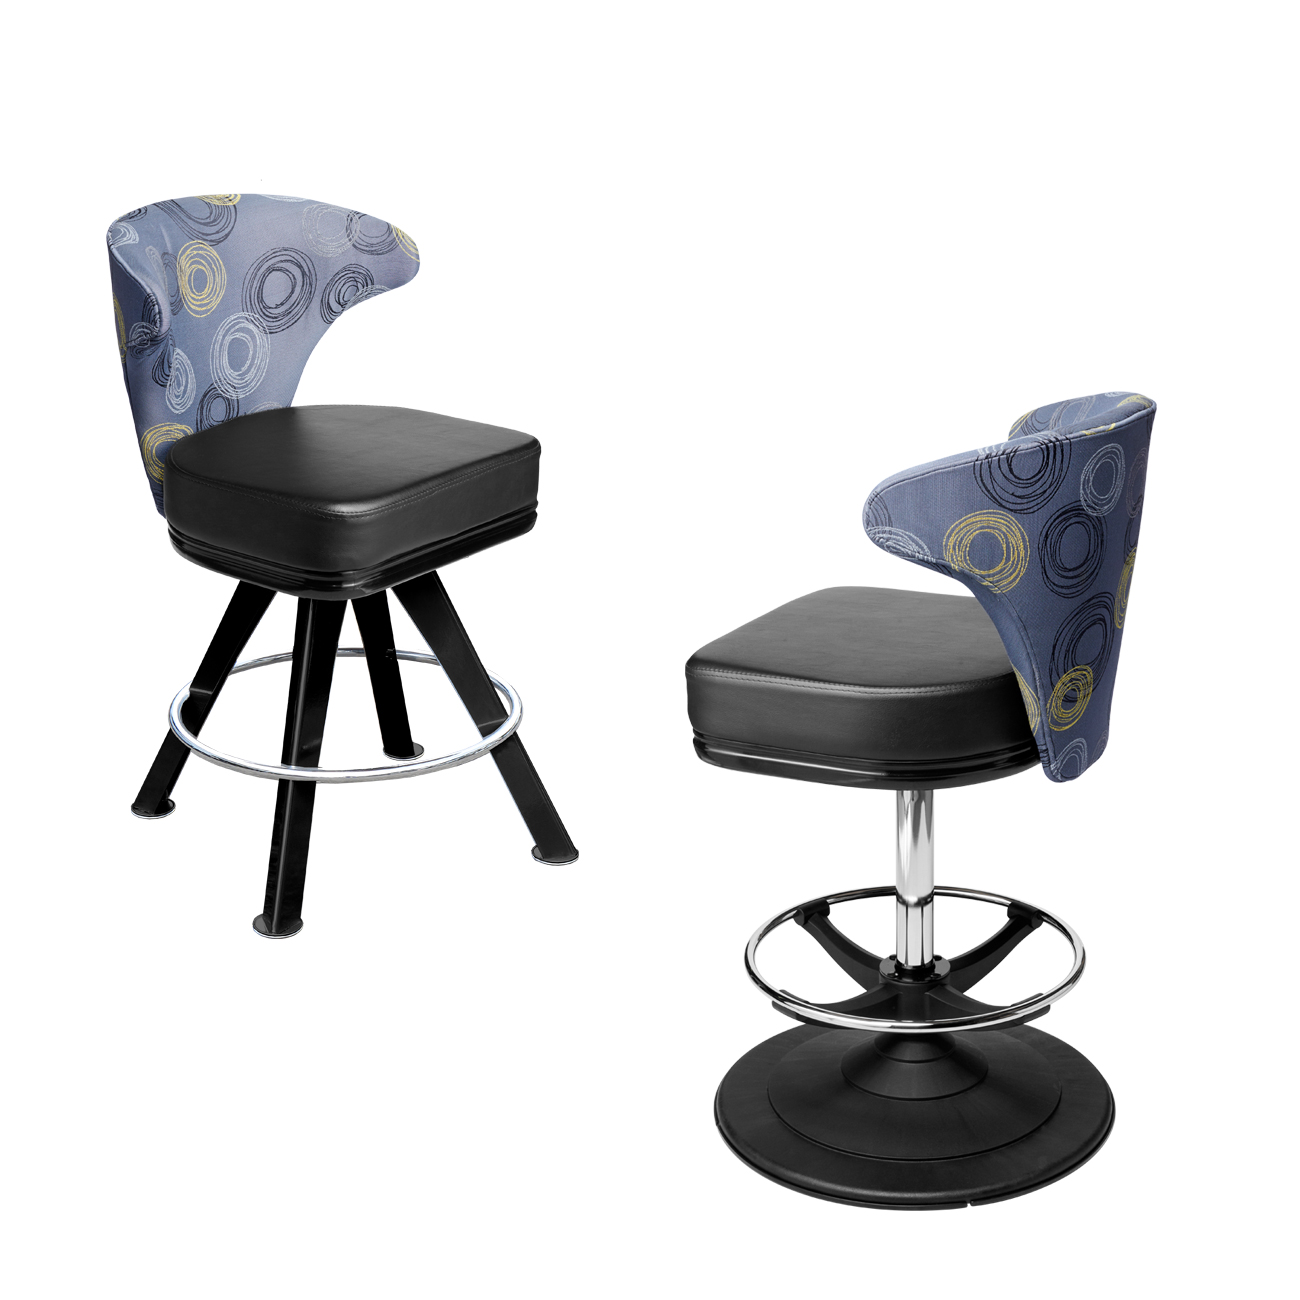 mercury casino gaming chair for pubs, clubs and casinos